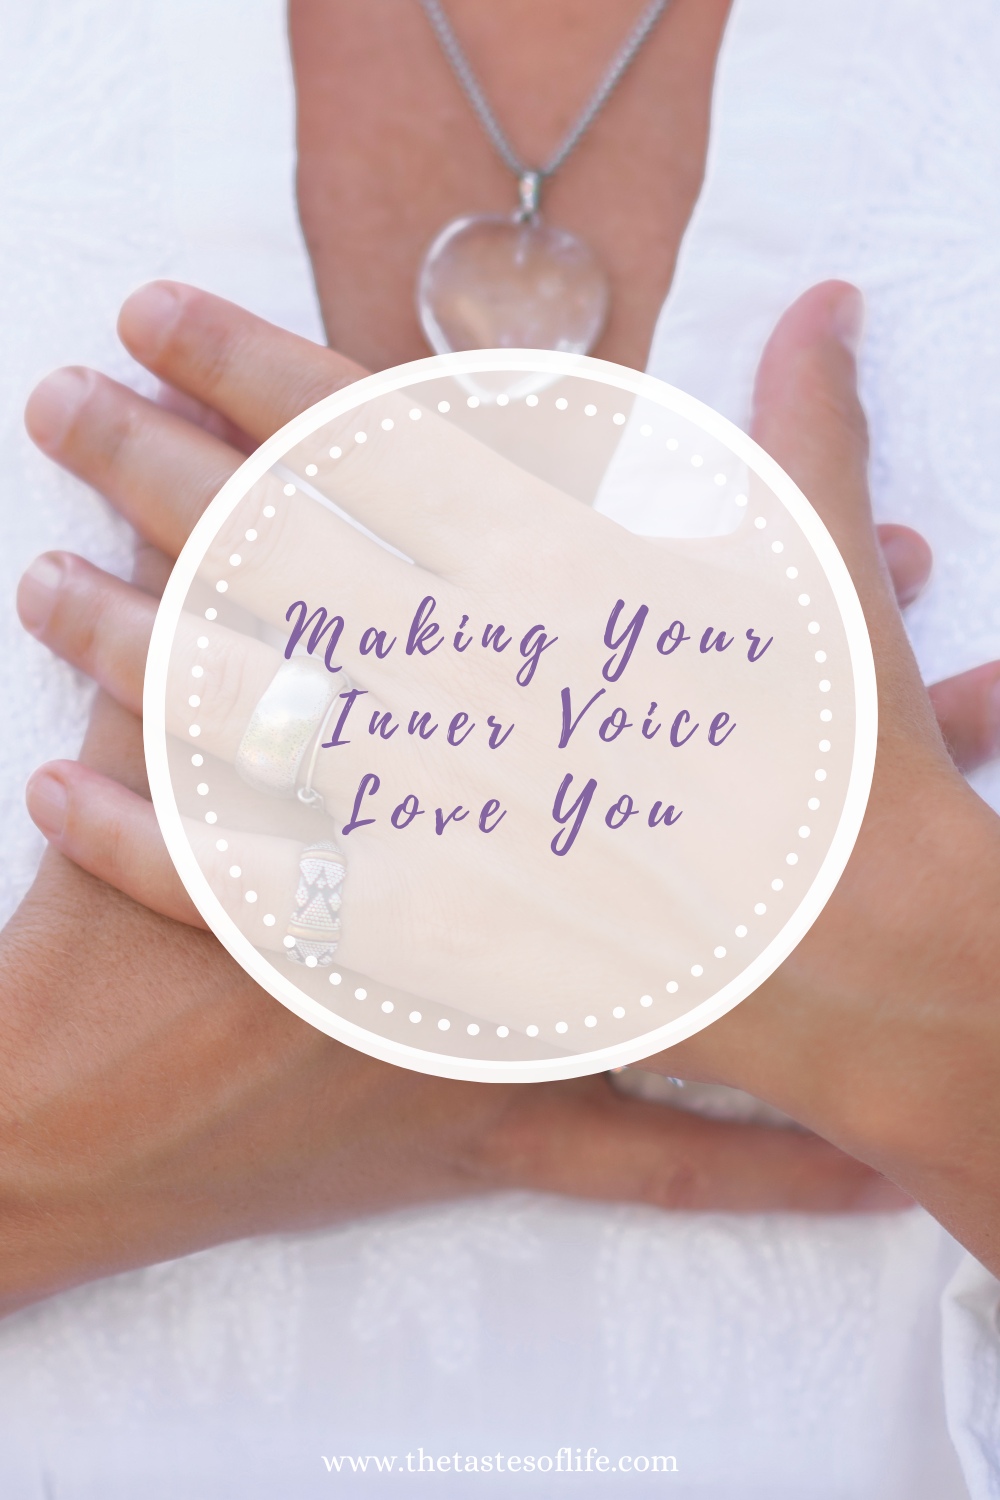 Making Your Inner Voice Love You to Create A Life You Love